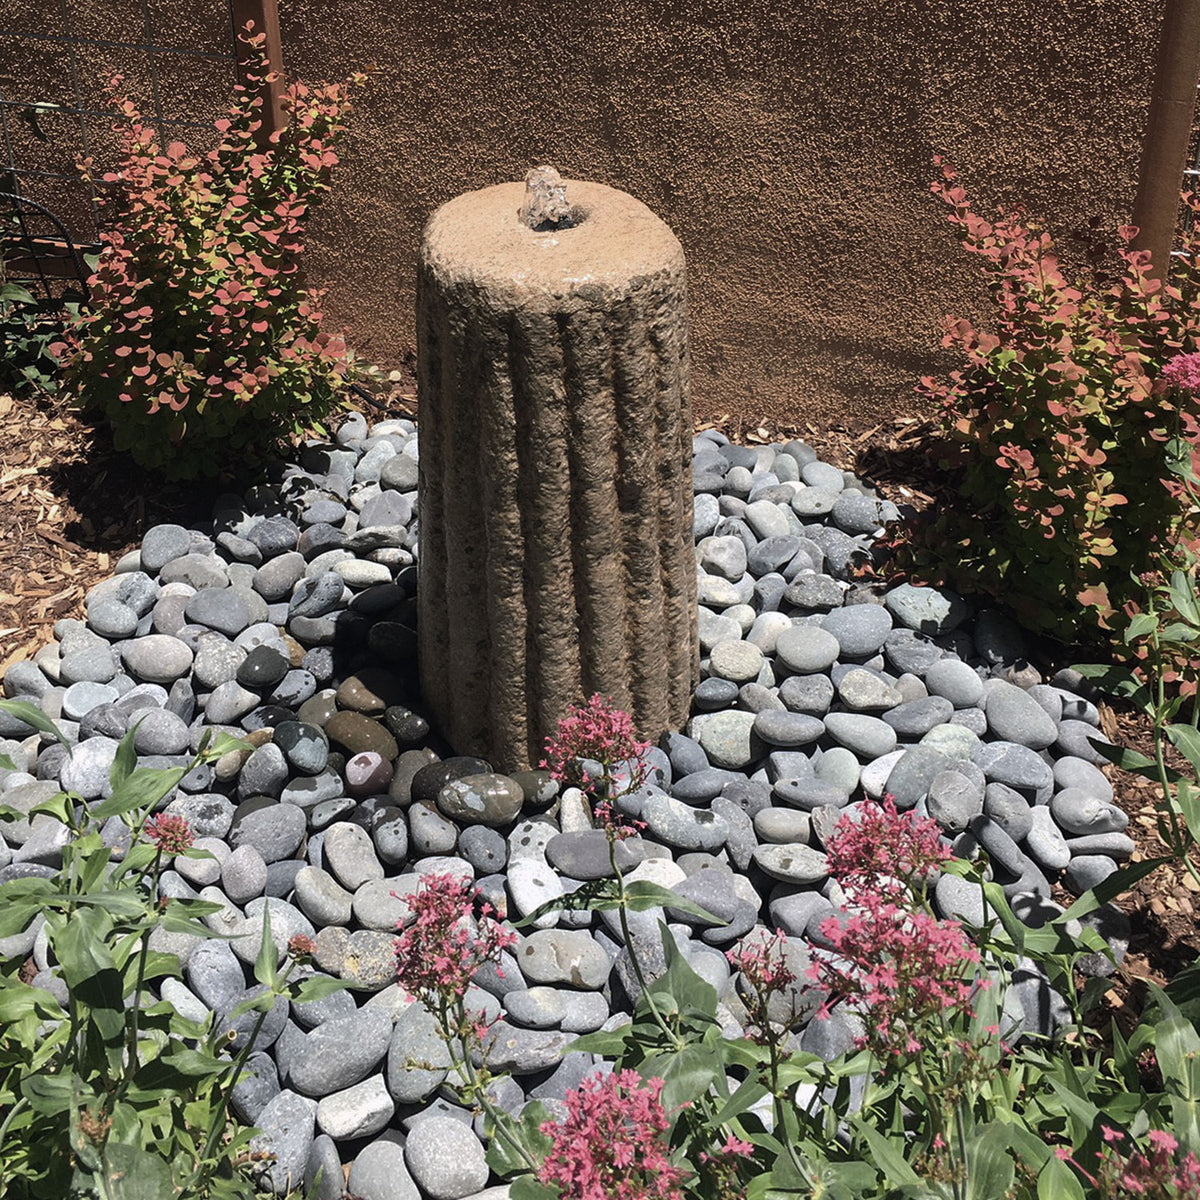 Stone Forest Small Antique Grinding Stone carved from beige granite used as garden fountain image 2 of 2